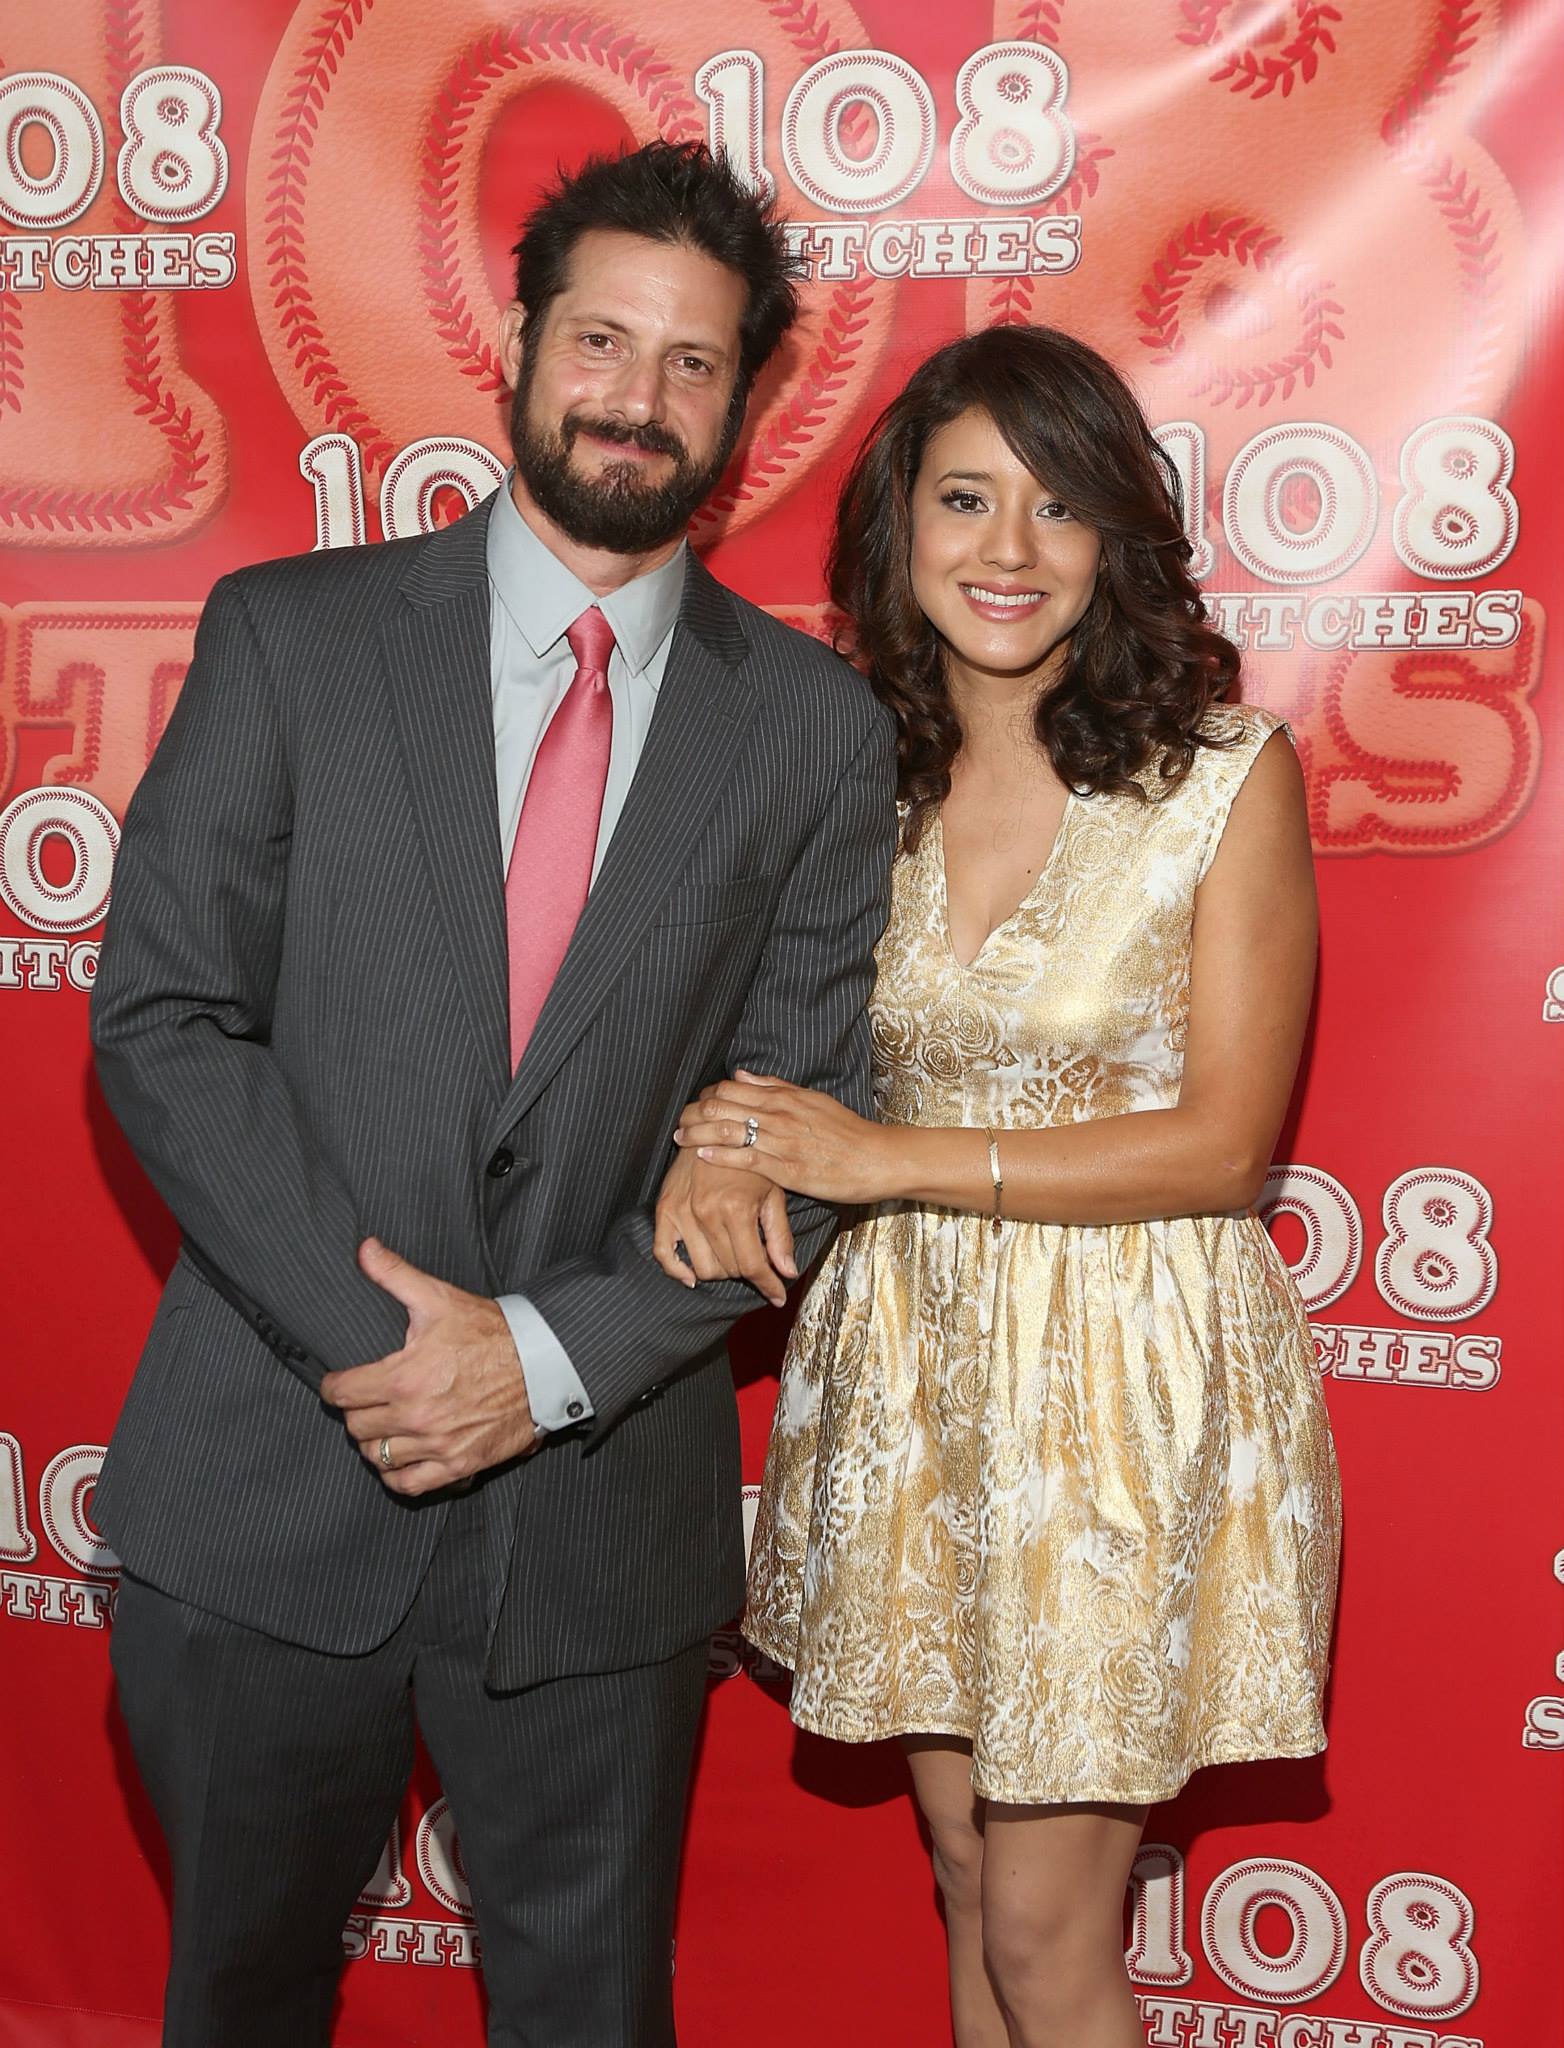 David Rountree and Rosie Garcia at event of 108 Stitches (2014)